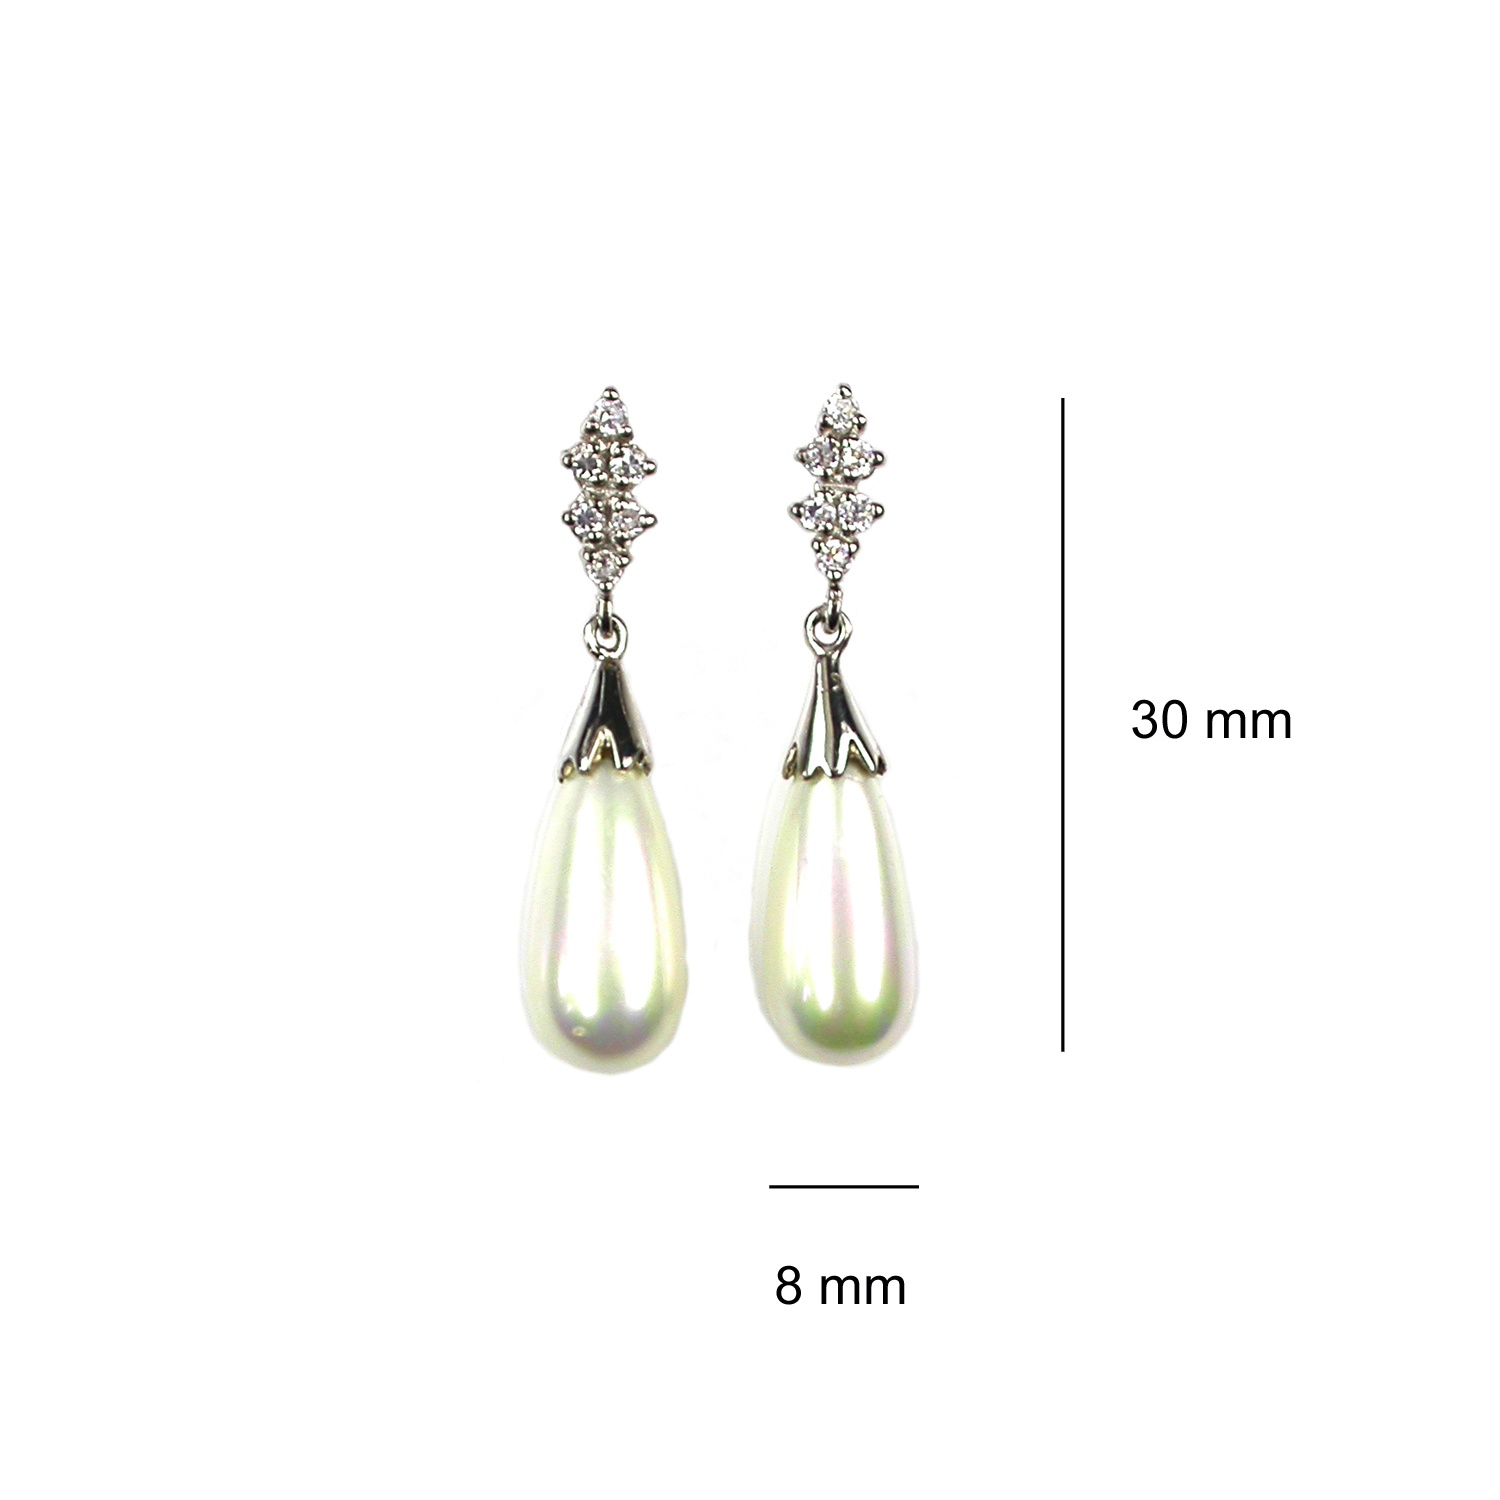 Silver Earrings with Zirconium and Pearls 3